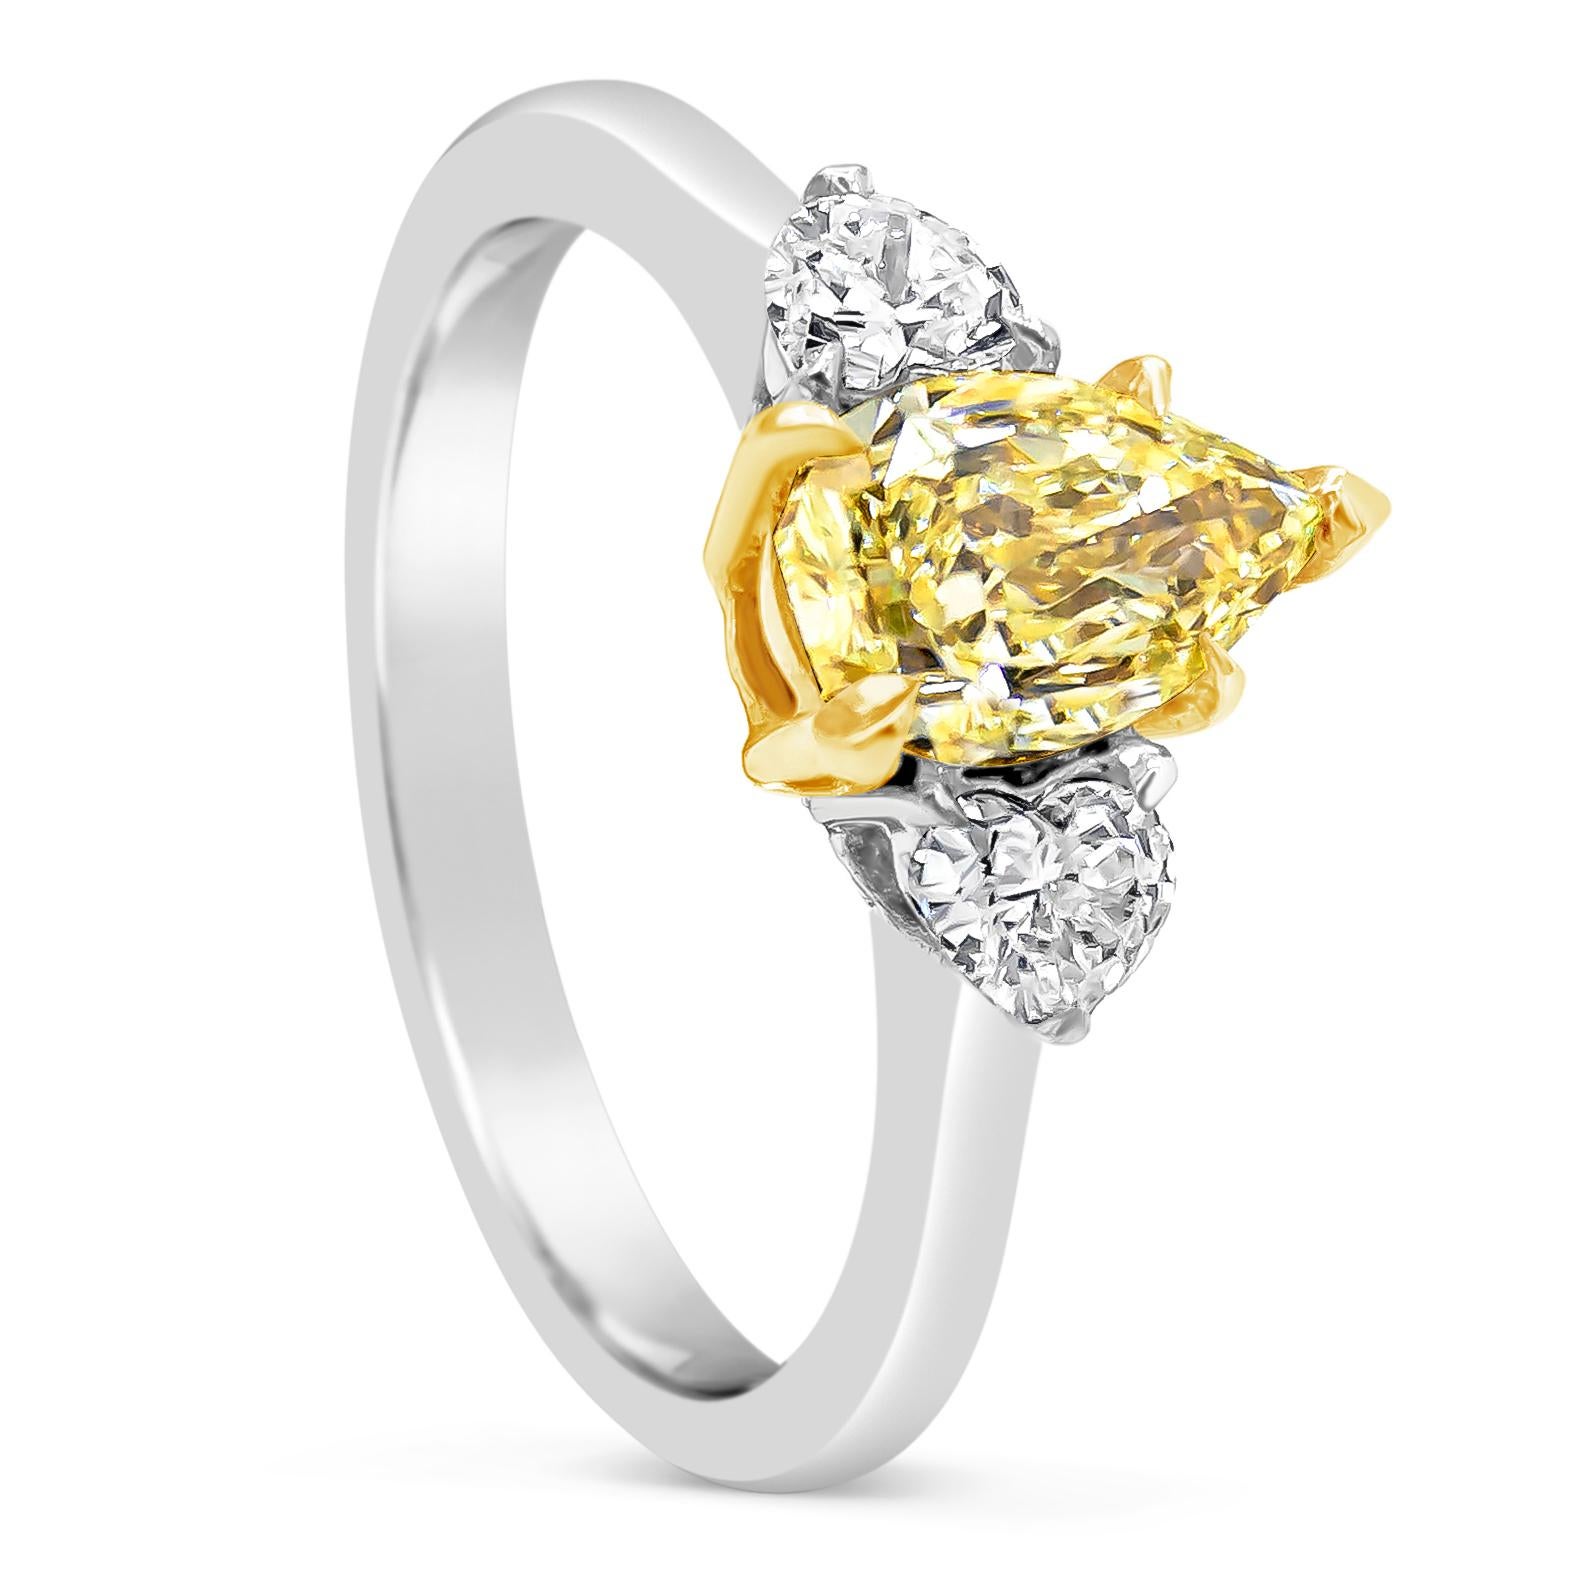 A unique engagement ring style showcasing a yellow pear shape diamond weighing 1.09 carats, set in a timeless five prong setting. Accented by two brilliant heart shape diamonds on each side weighing 0.30 carats total. Made in an 18K yellow gold and